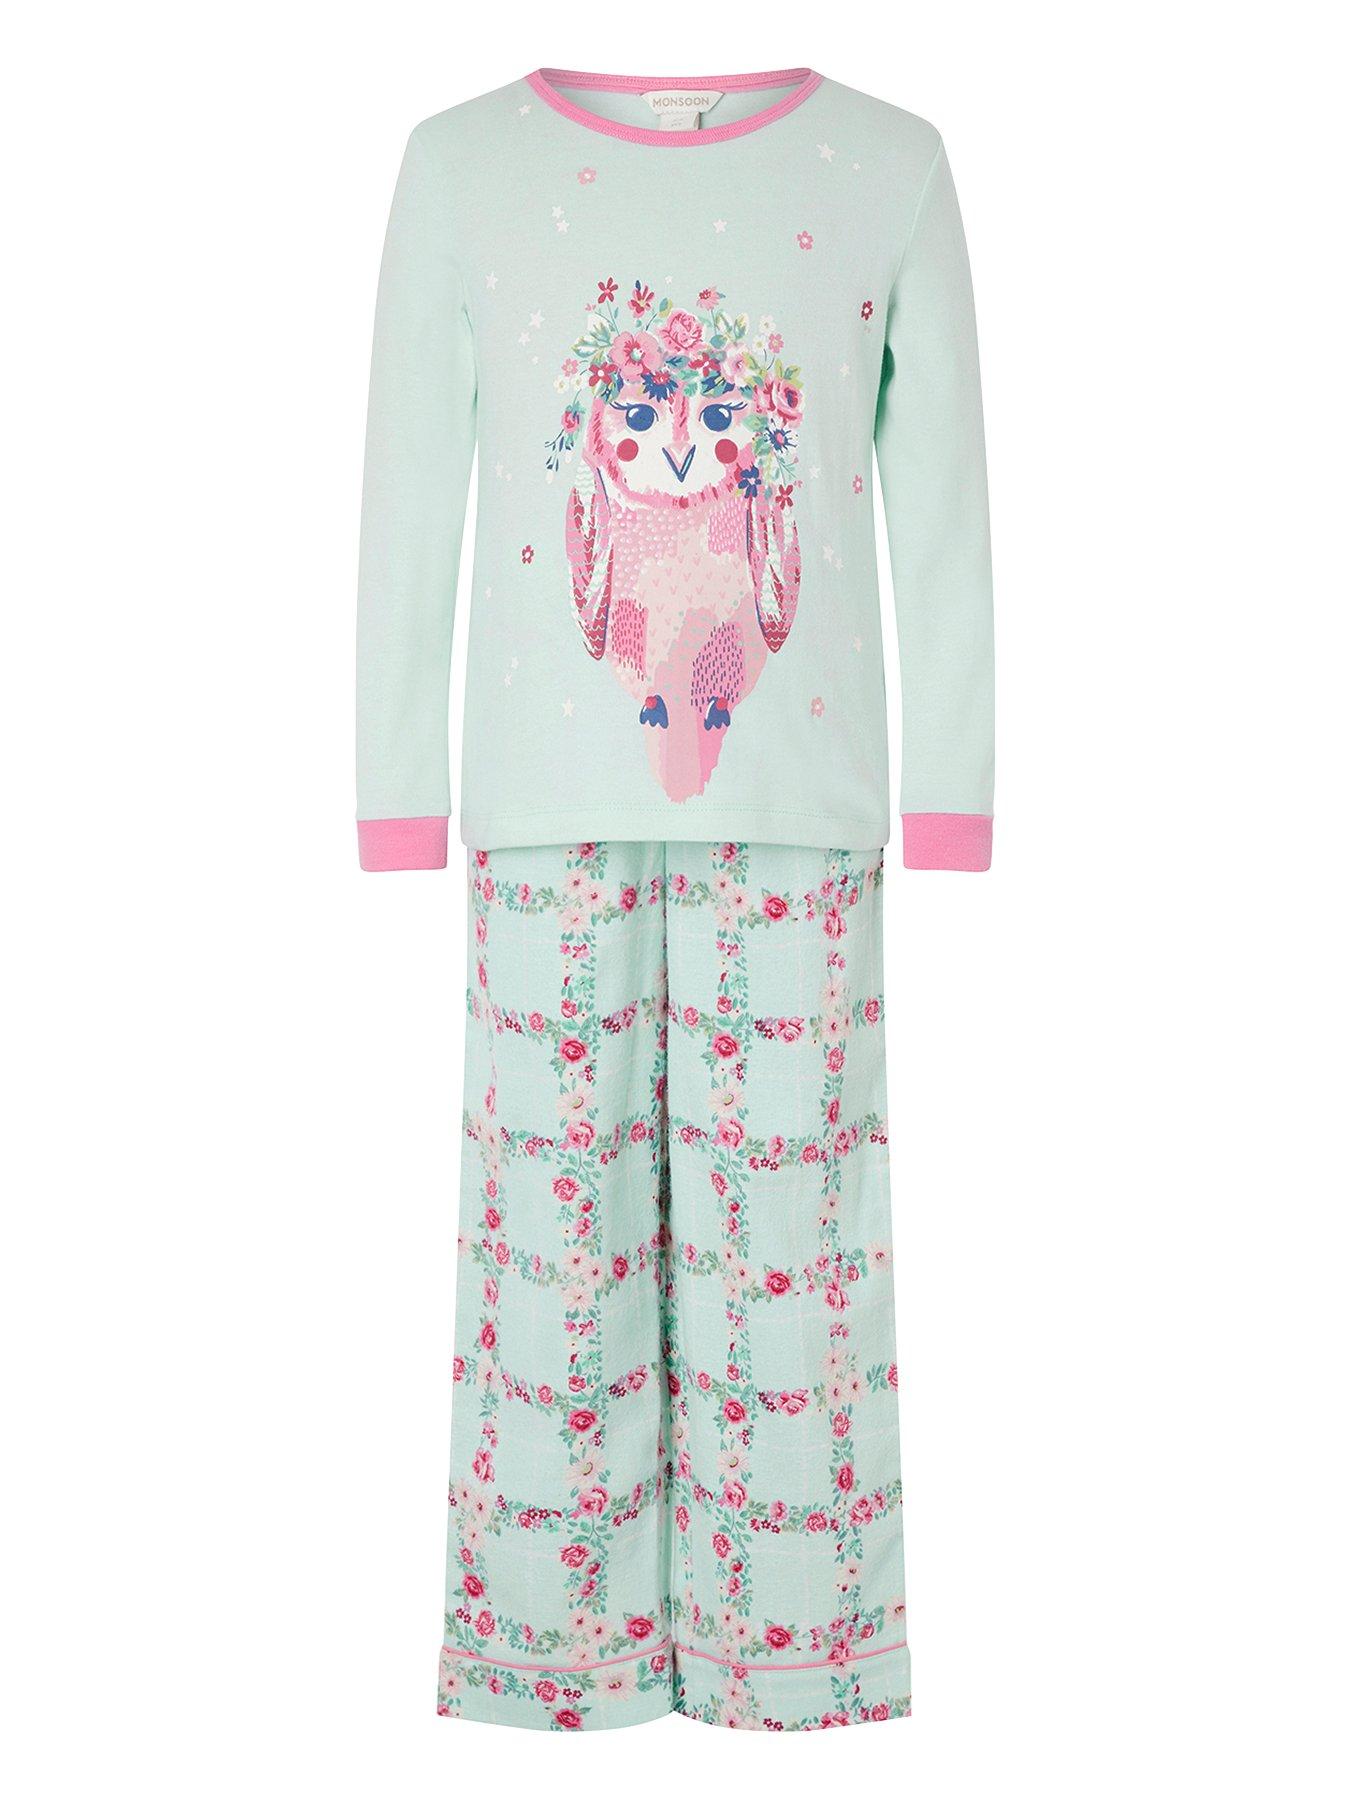 Harry Potter Girls Pyjamas Priced to Clear 5-6 Years Only